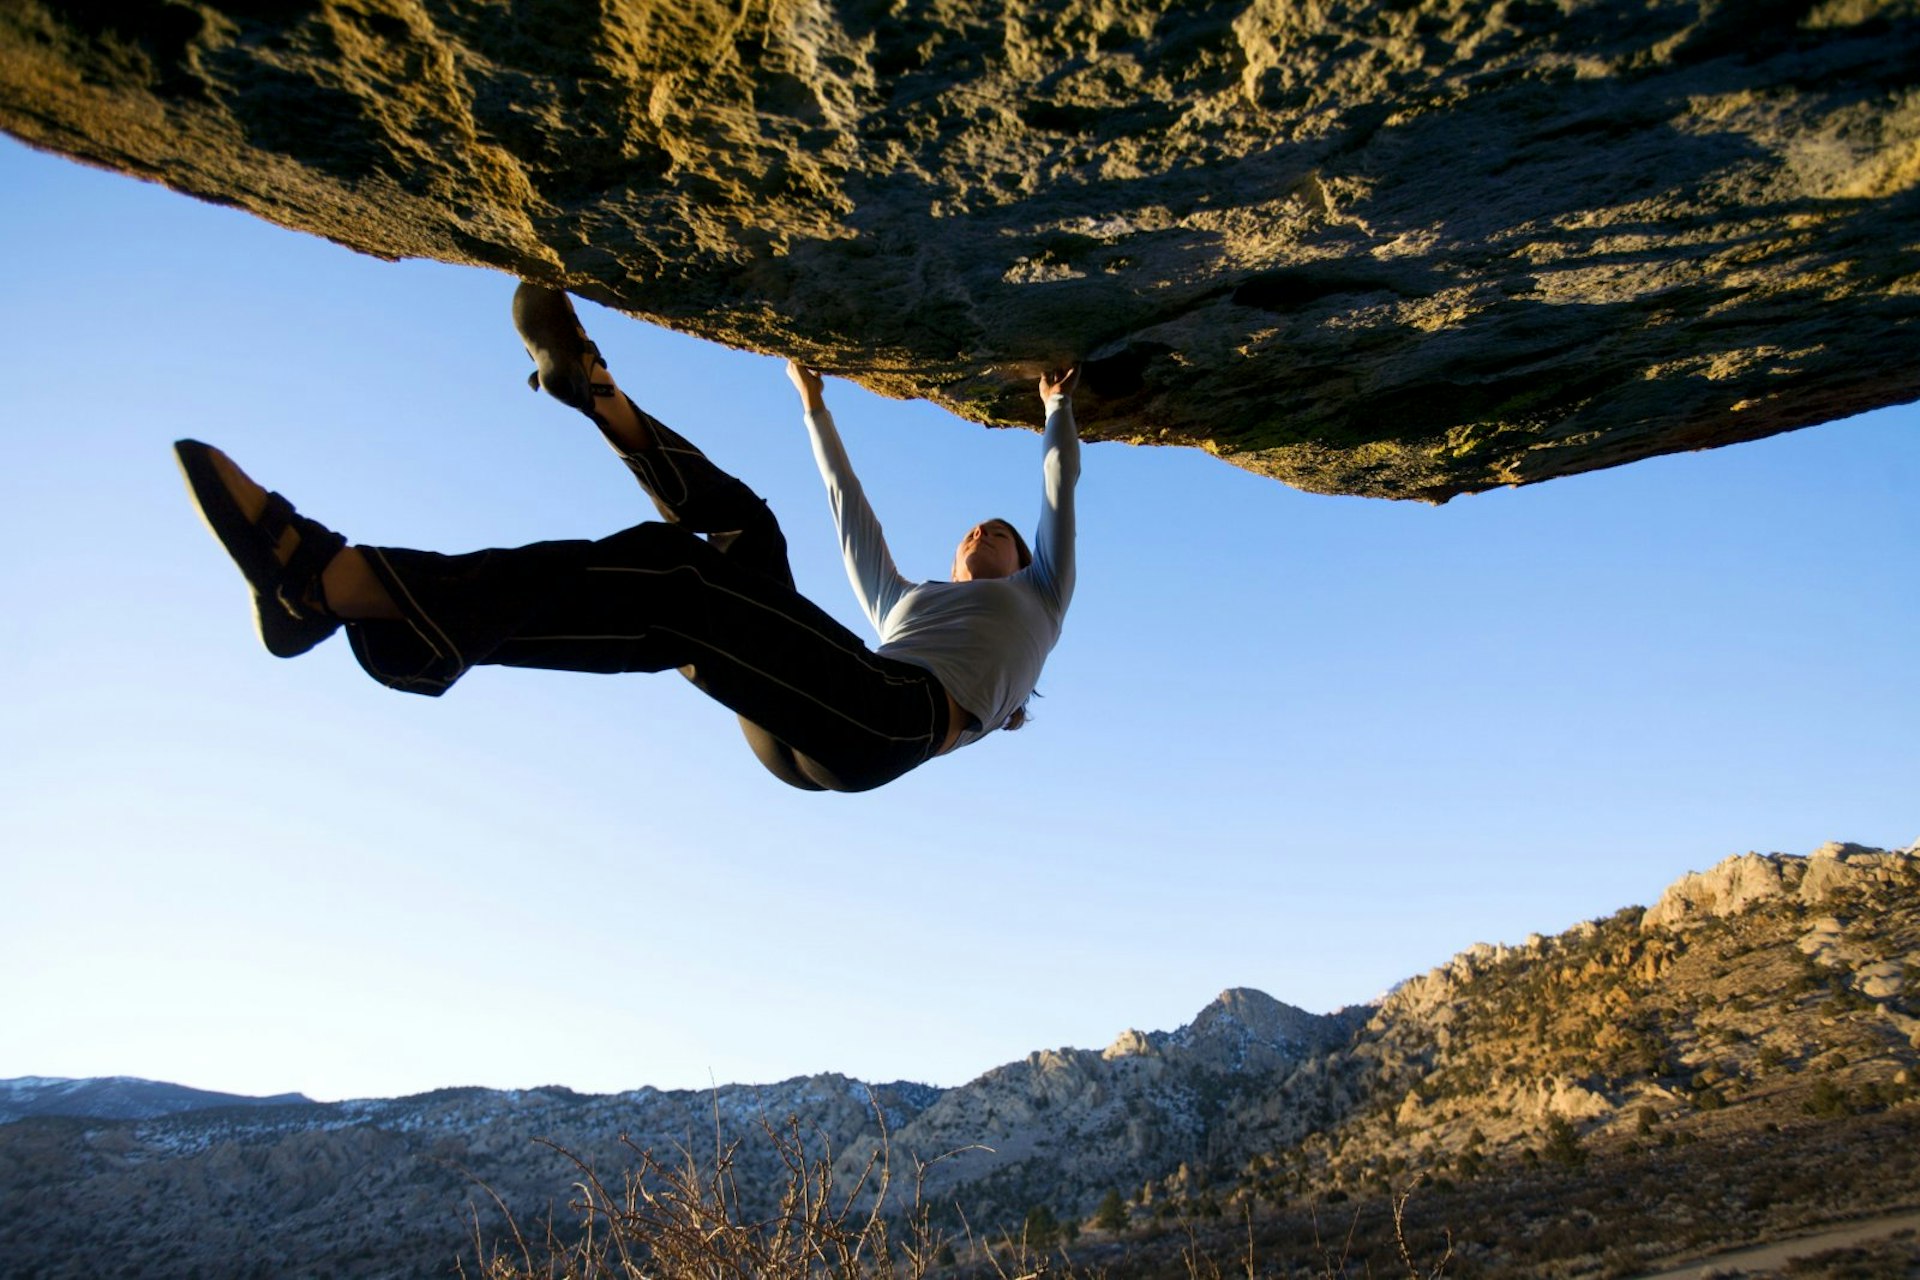 A woman, without equipment to support her, hangs below a rocky overhang